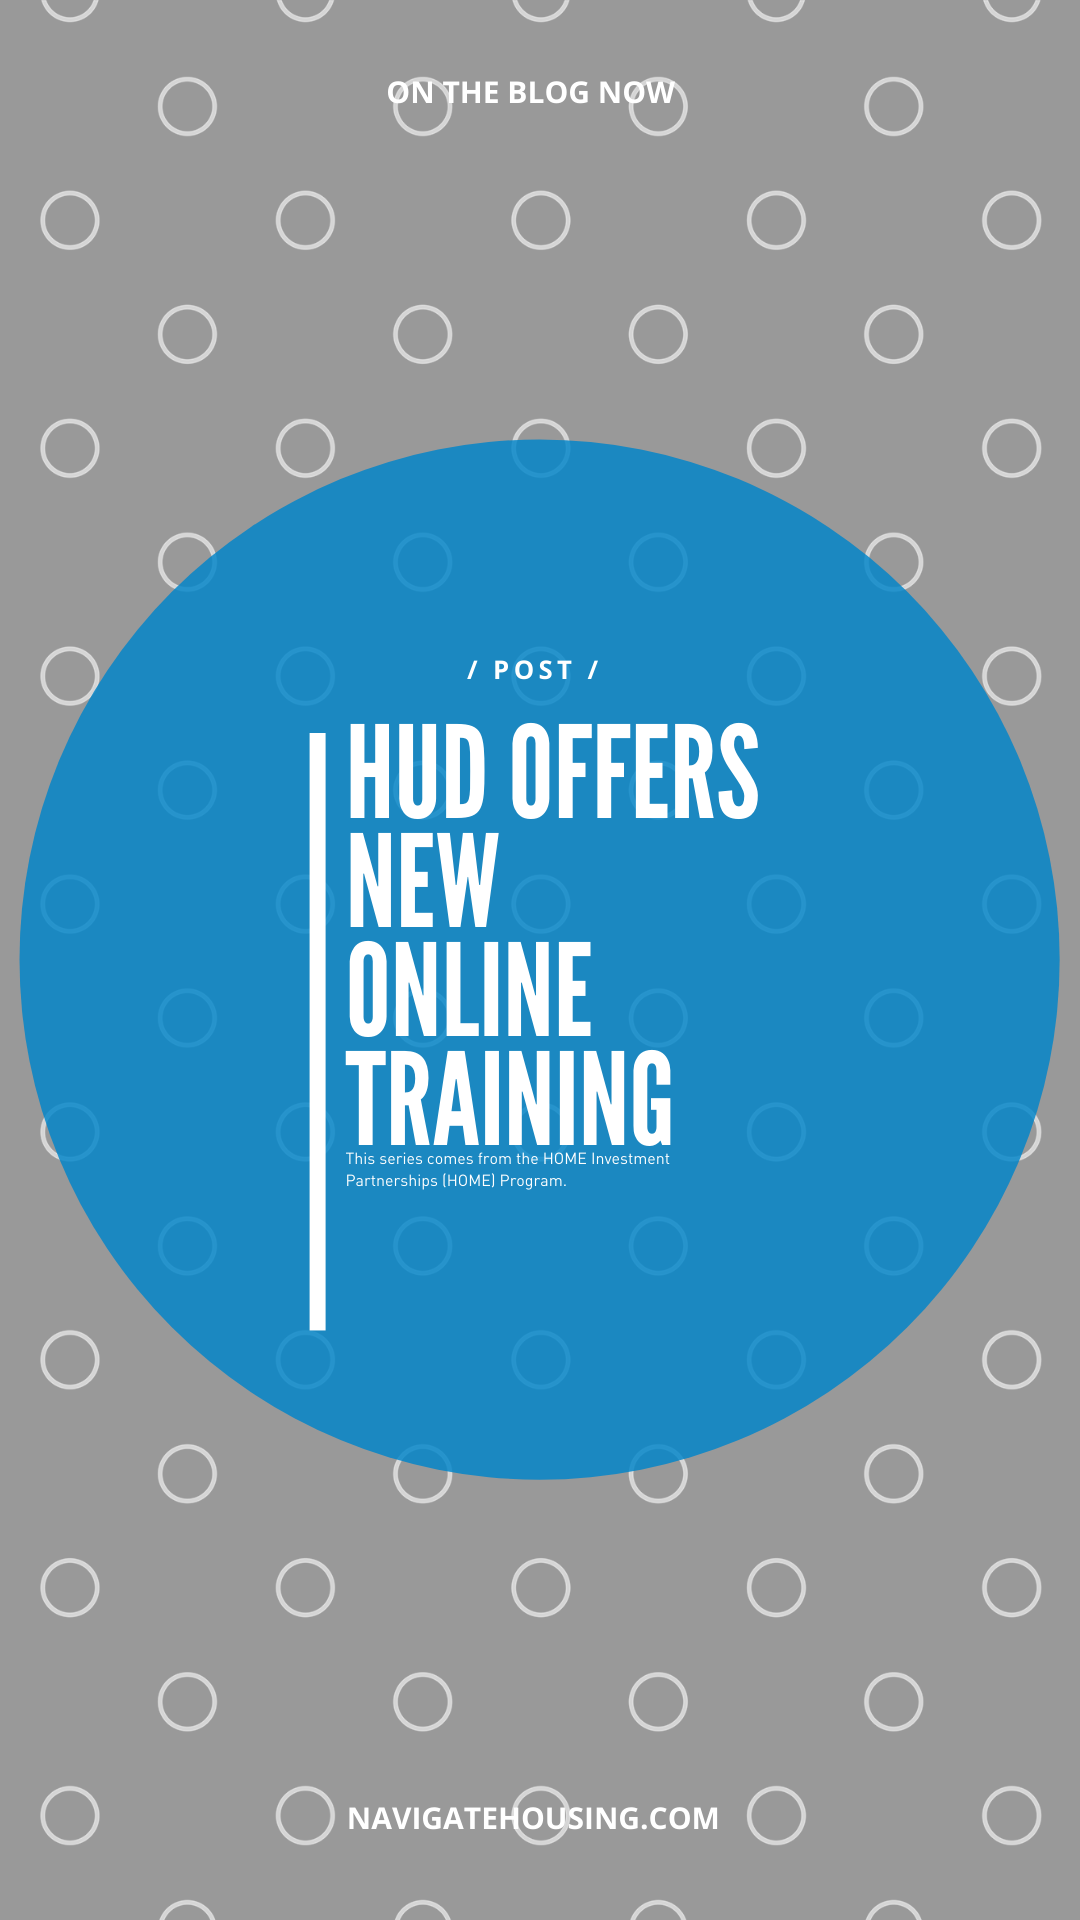 HUD Offers New Online Training